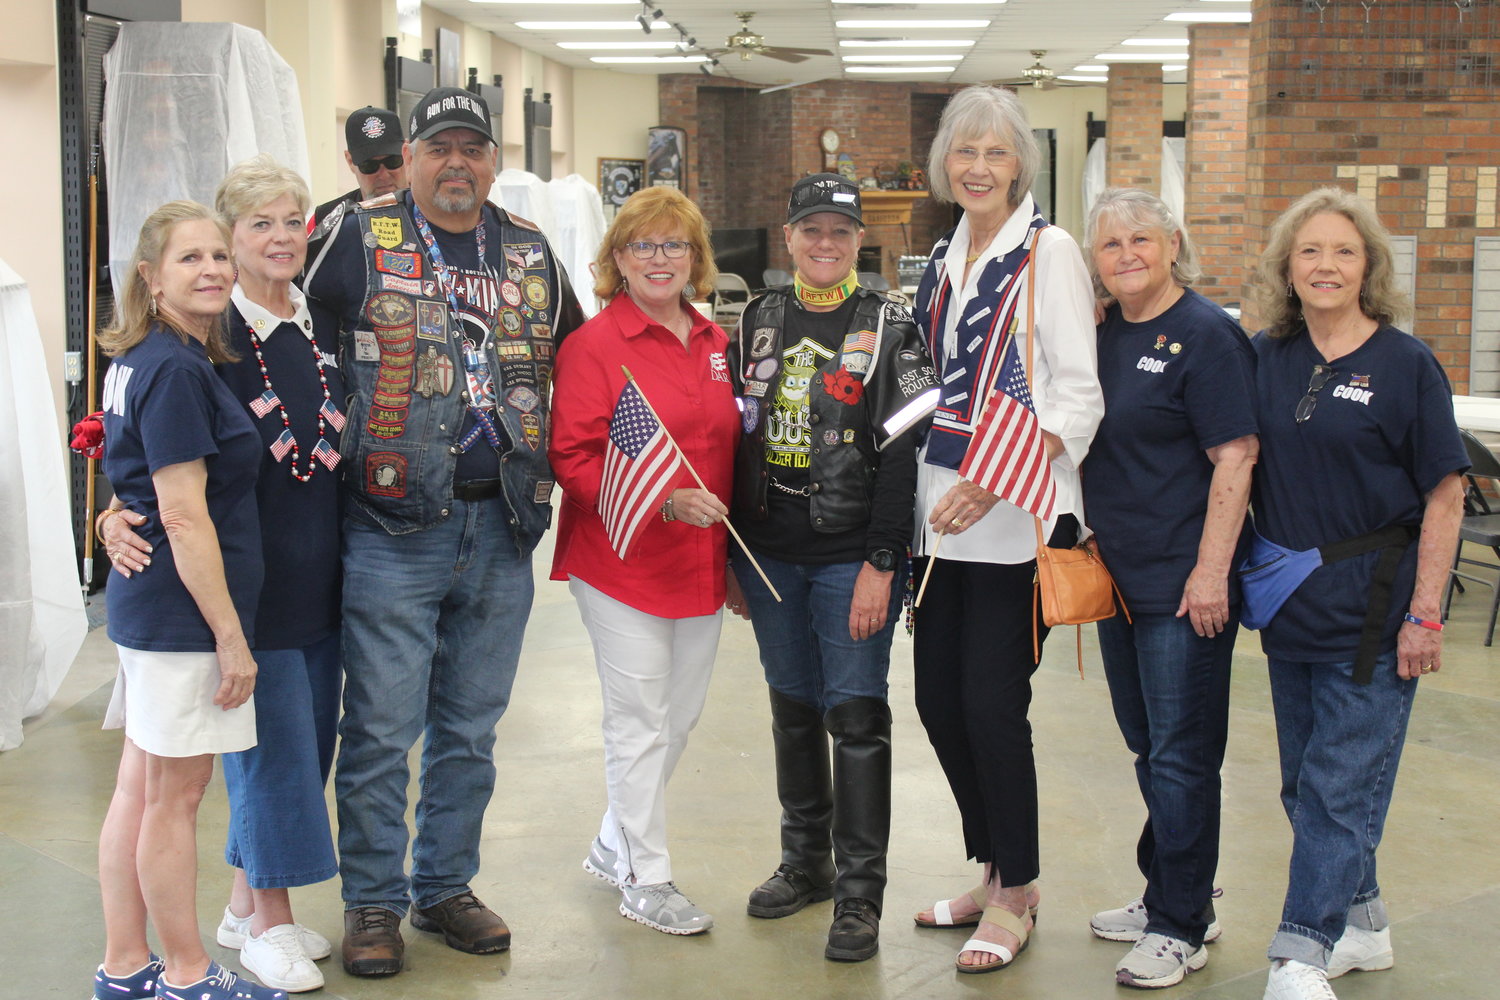 Pictured, from left, are Debbie Cannon, Margaret Collier, Bob Nelson, Hellen Hicks Polk, Kristen Woods, Polly Grimes, Beth Herring and Anne Mollere.